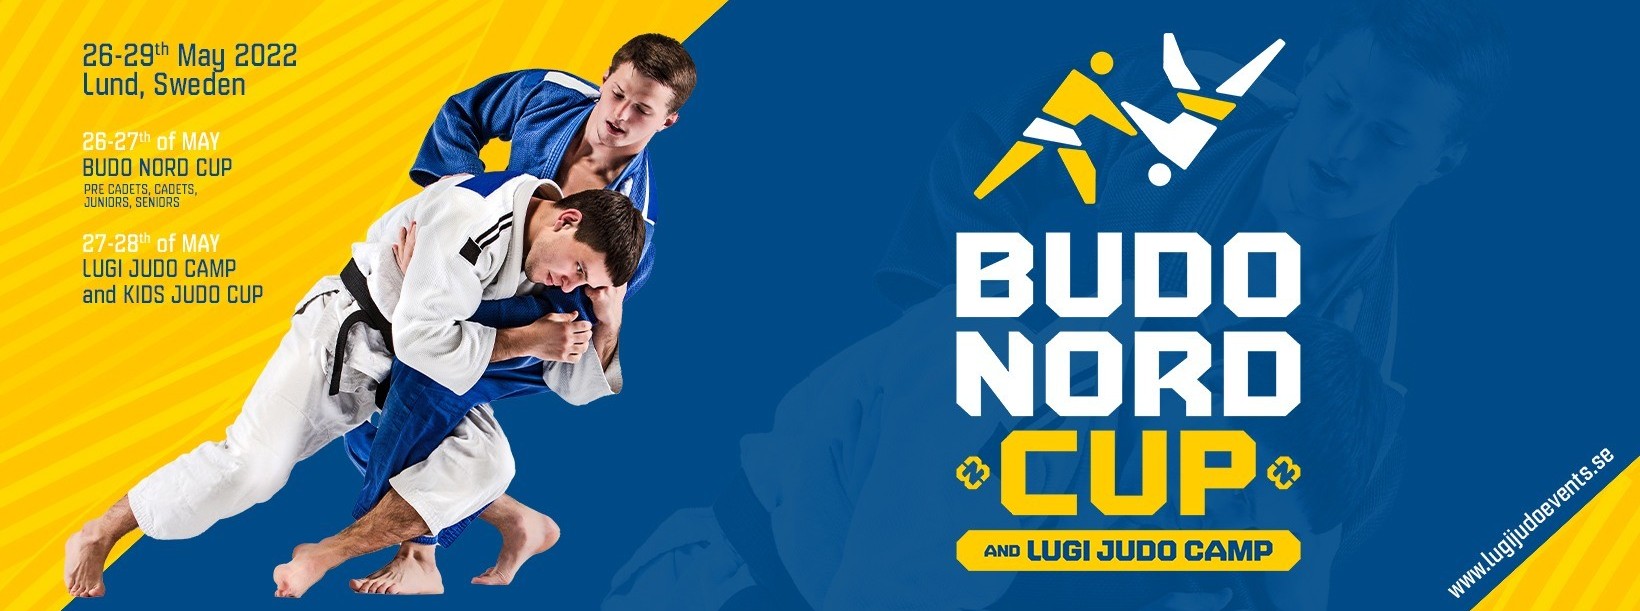 BUDO NORD CUP 2022